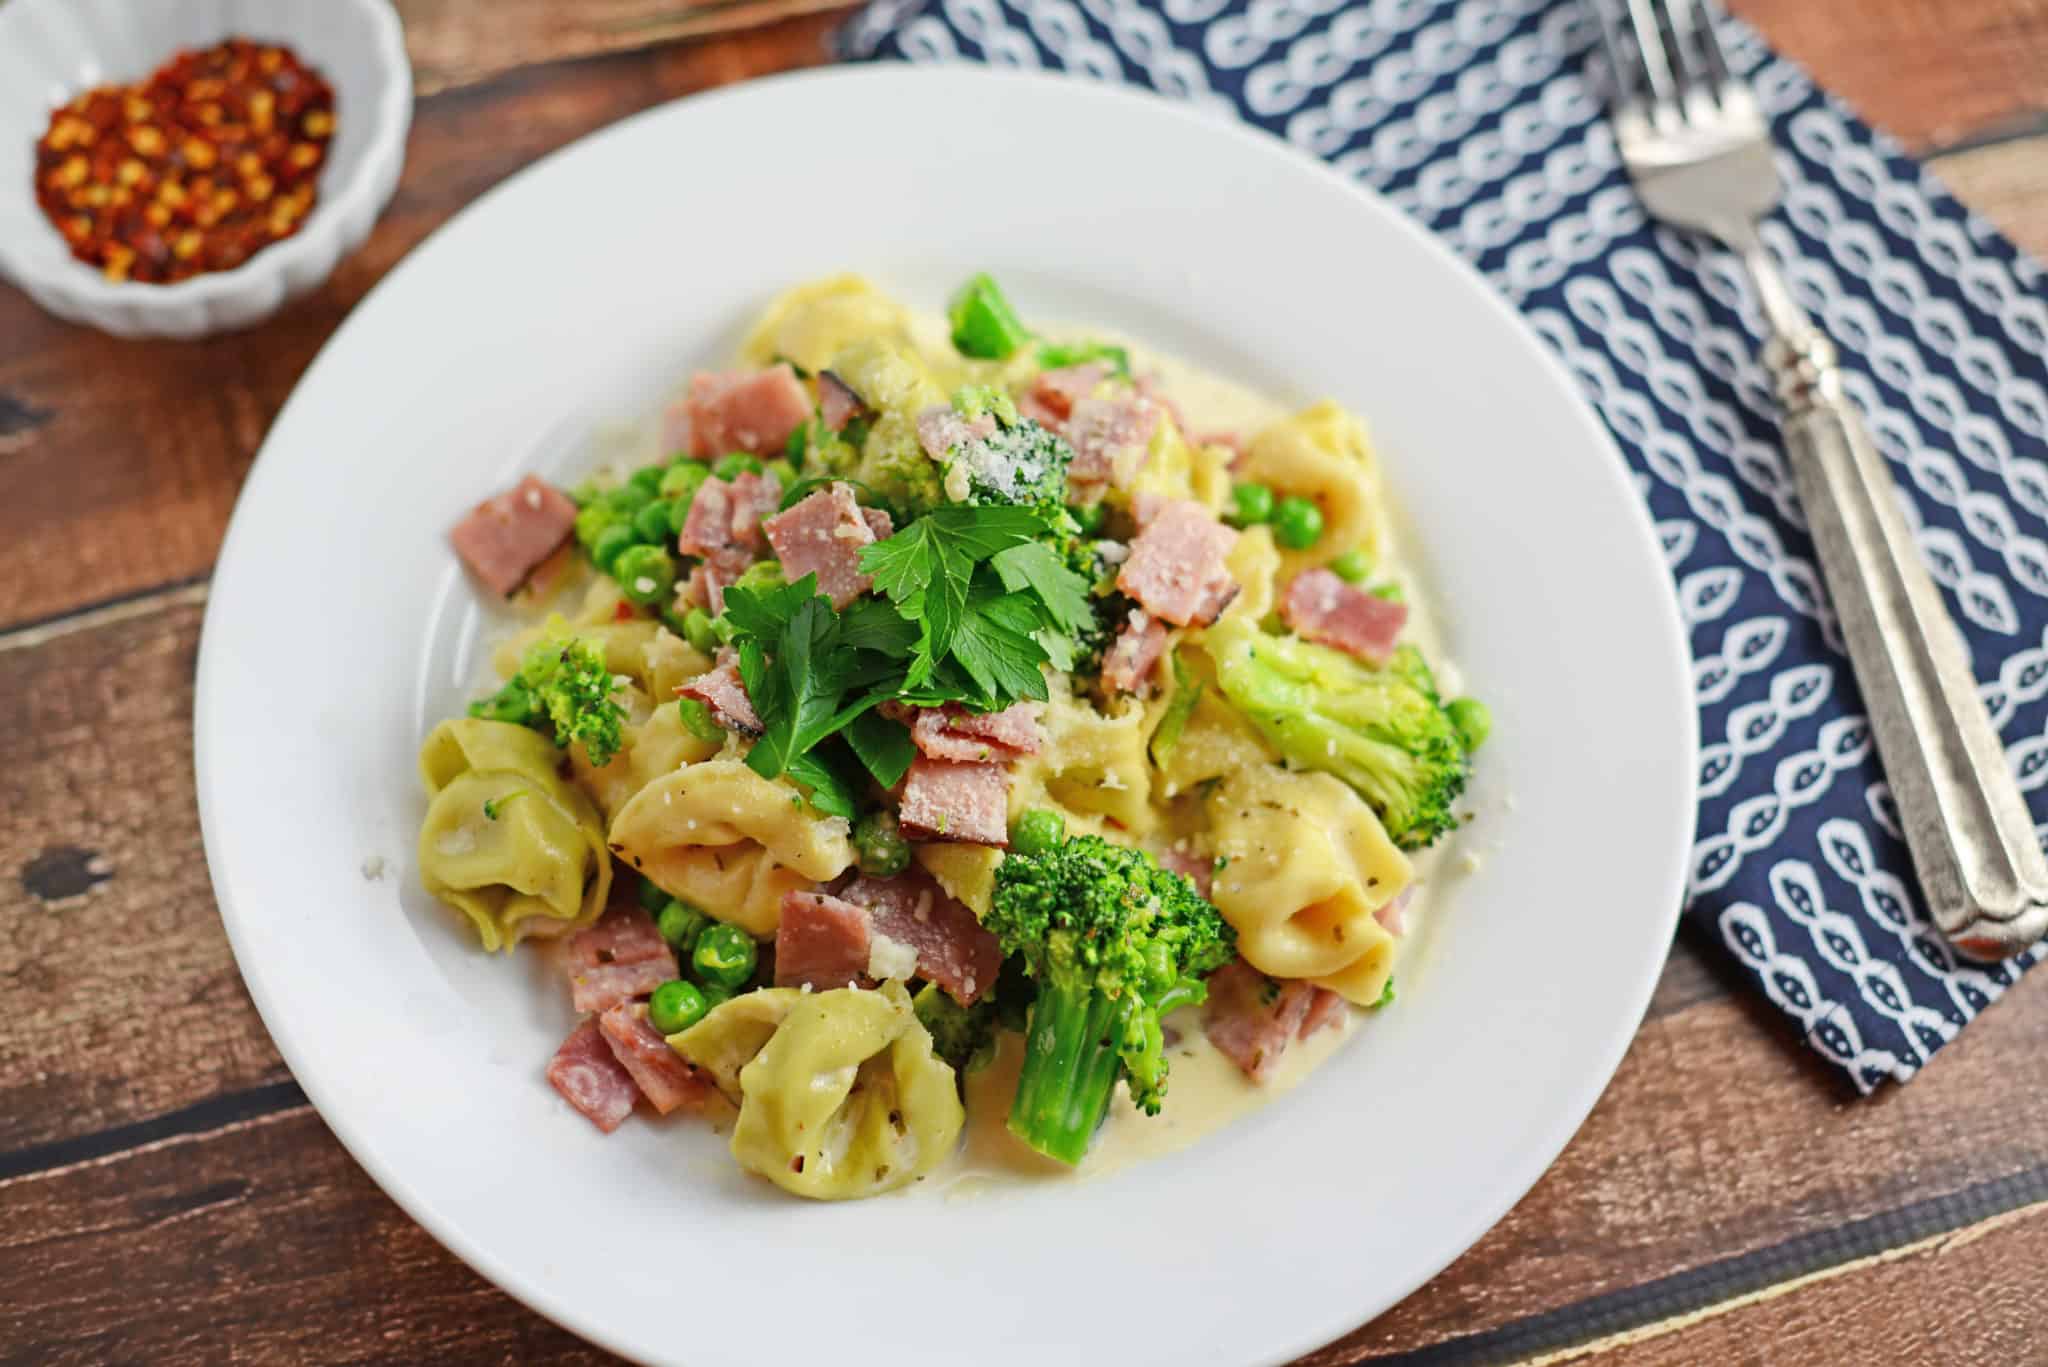 Creamy Tortellini and Ham Pasta - An easy pasta recipe ready in just 20 minutes! Peas, broccoli, ham and cheese tortellini! www.savoryexperiments.com